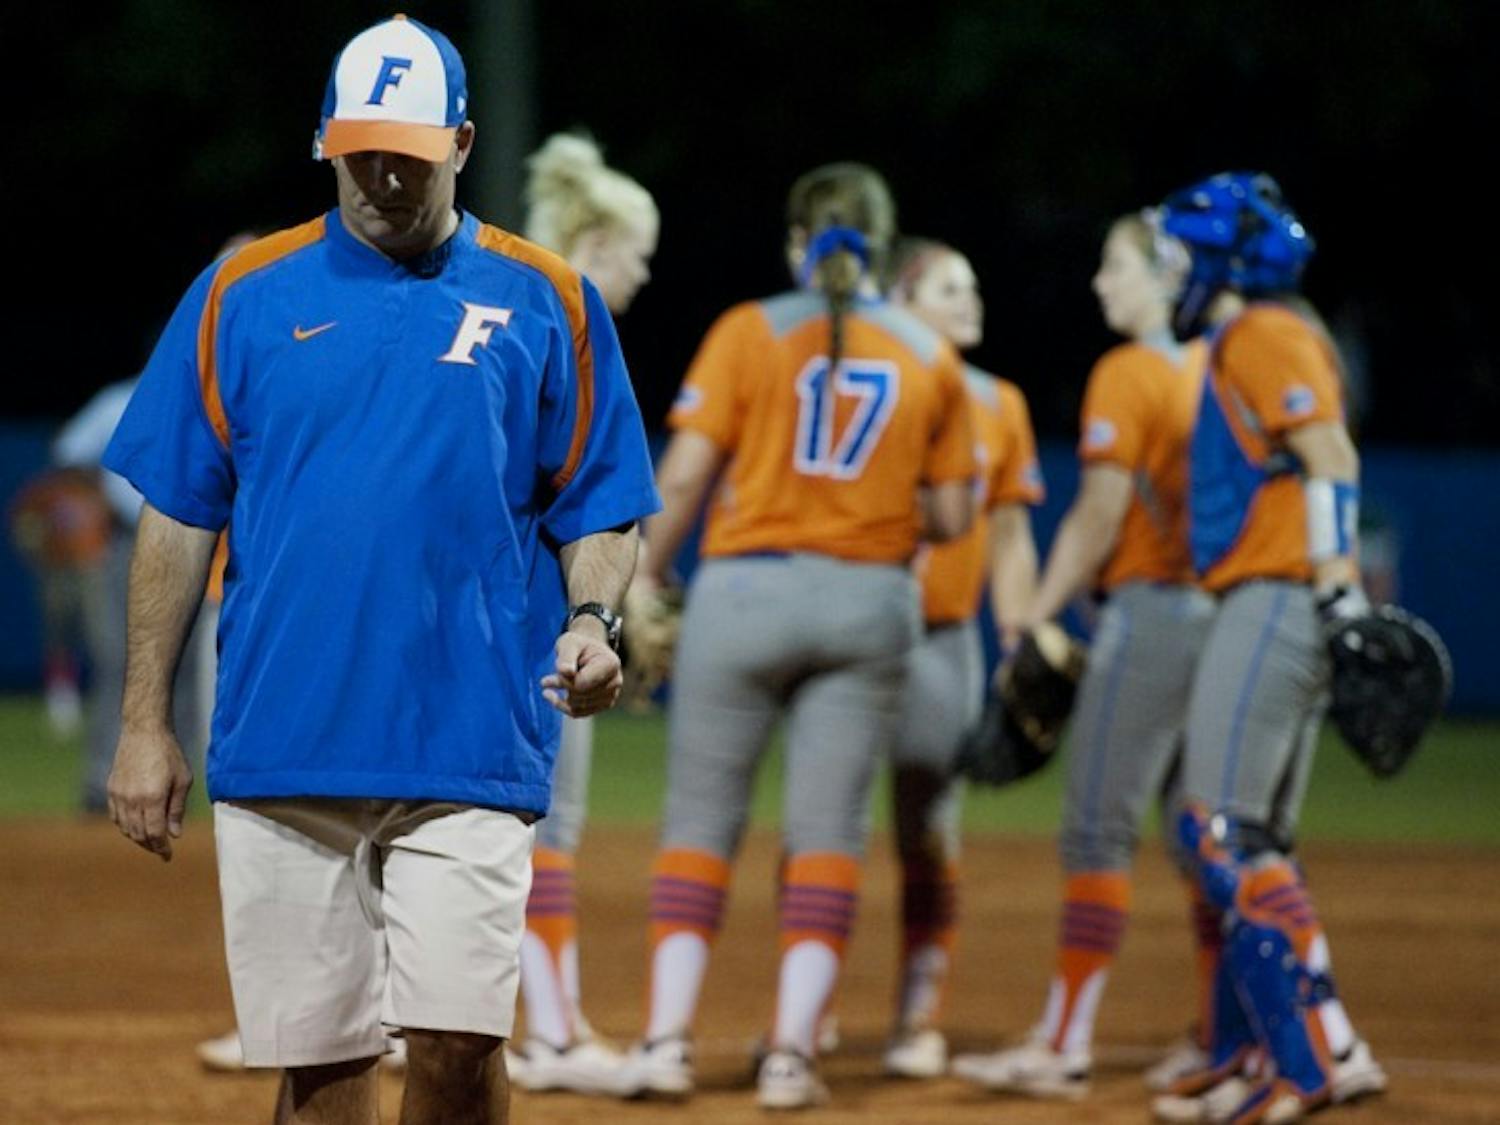 Florida coach Tim Walton walks back to the dugout after a team meeting during the Gators’ 4-1 loss to USF on Wednesday night. Freshman Lauren Haeger picked up the loss, allowing two earned runs.